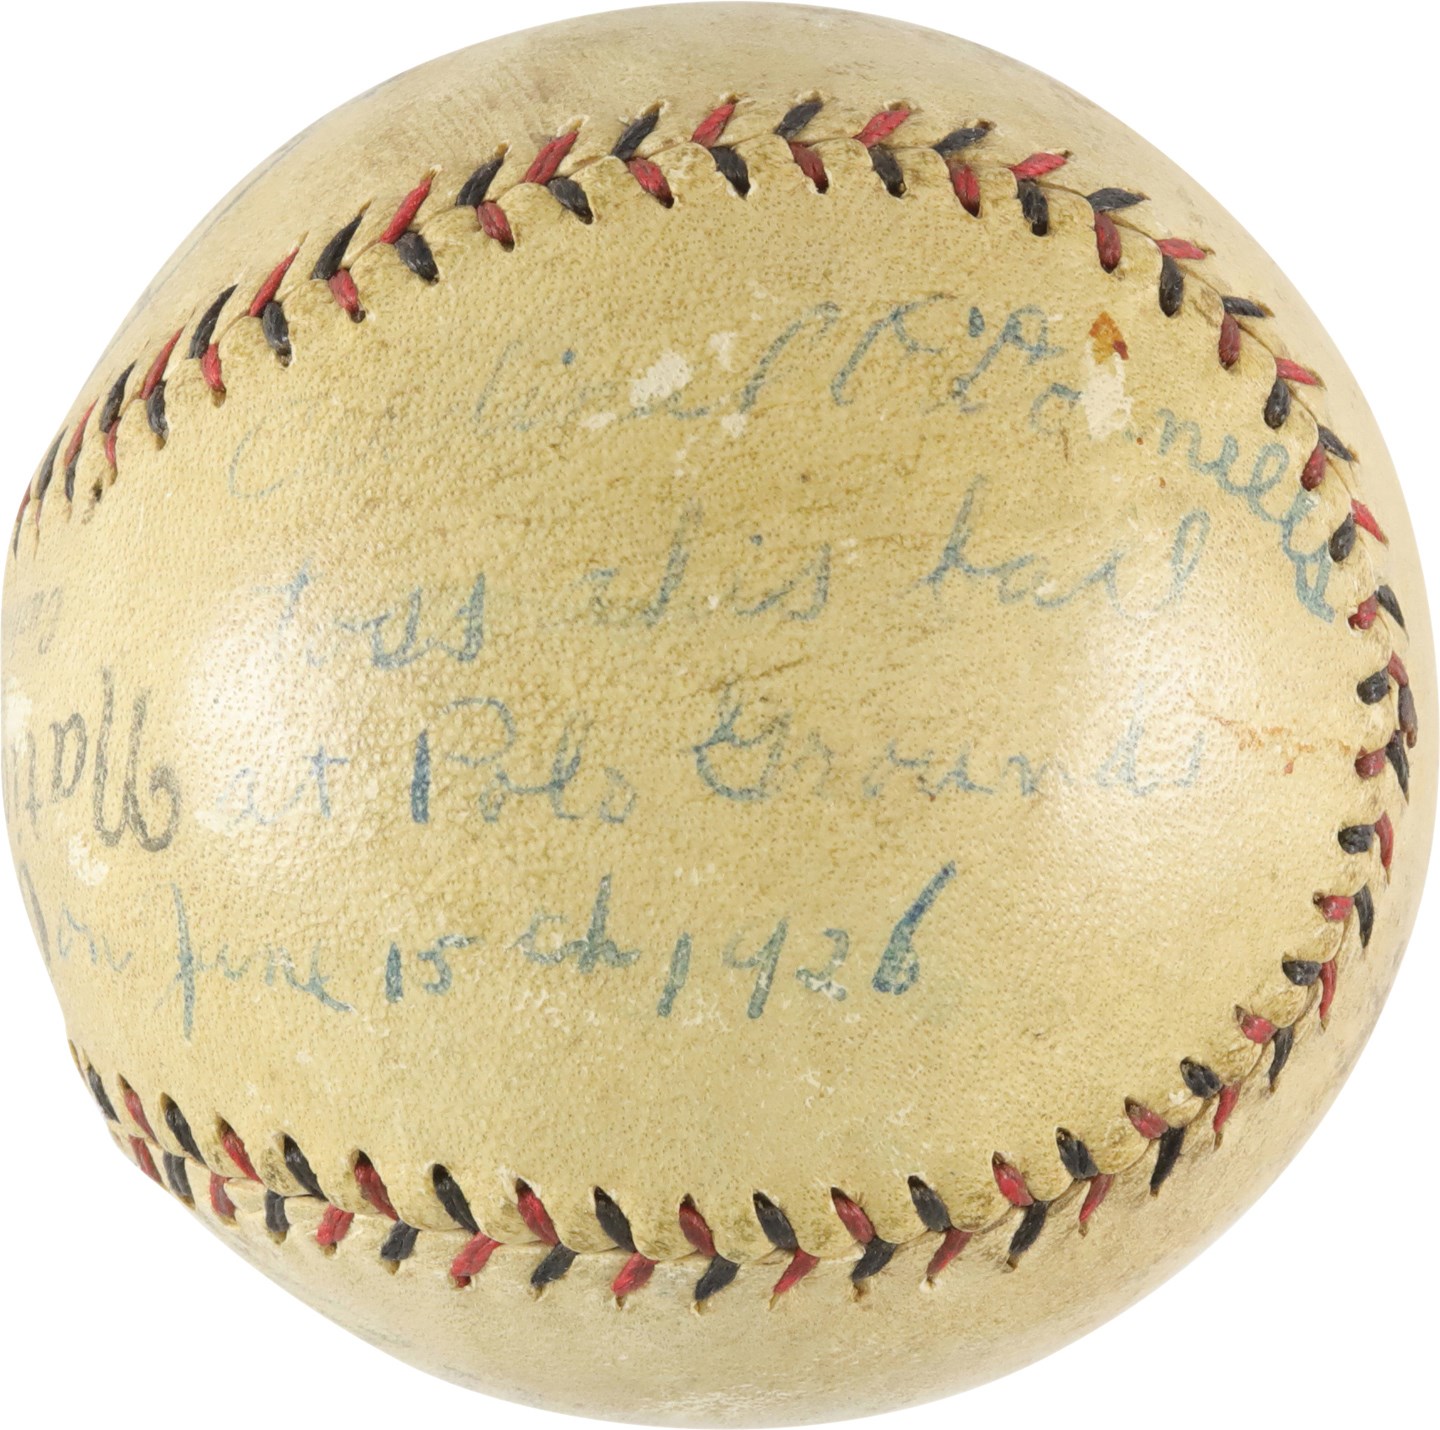 Baseball Memorabilia - June 15th, 1926, Cardinal Patrick O'Donnell First Pitch Baseball (ex-Jimmy Ring Collection)